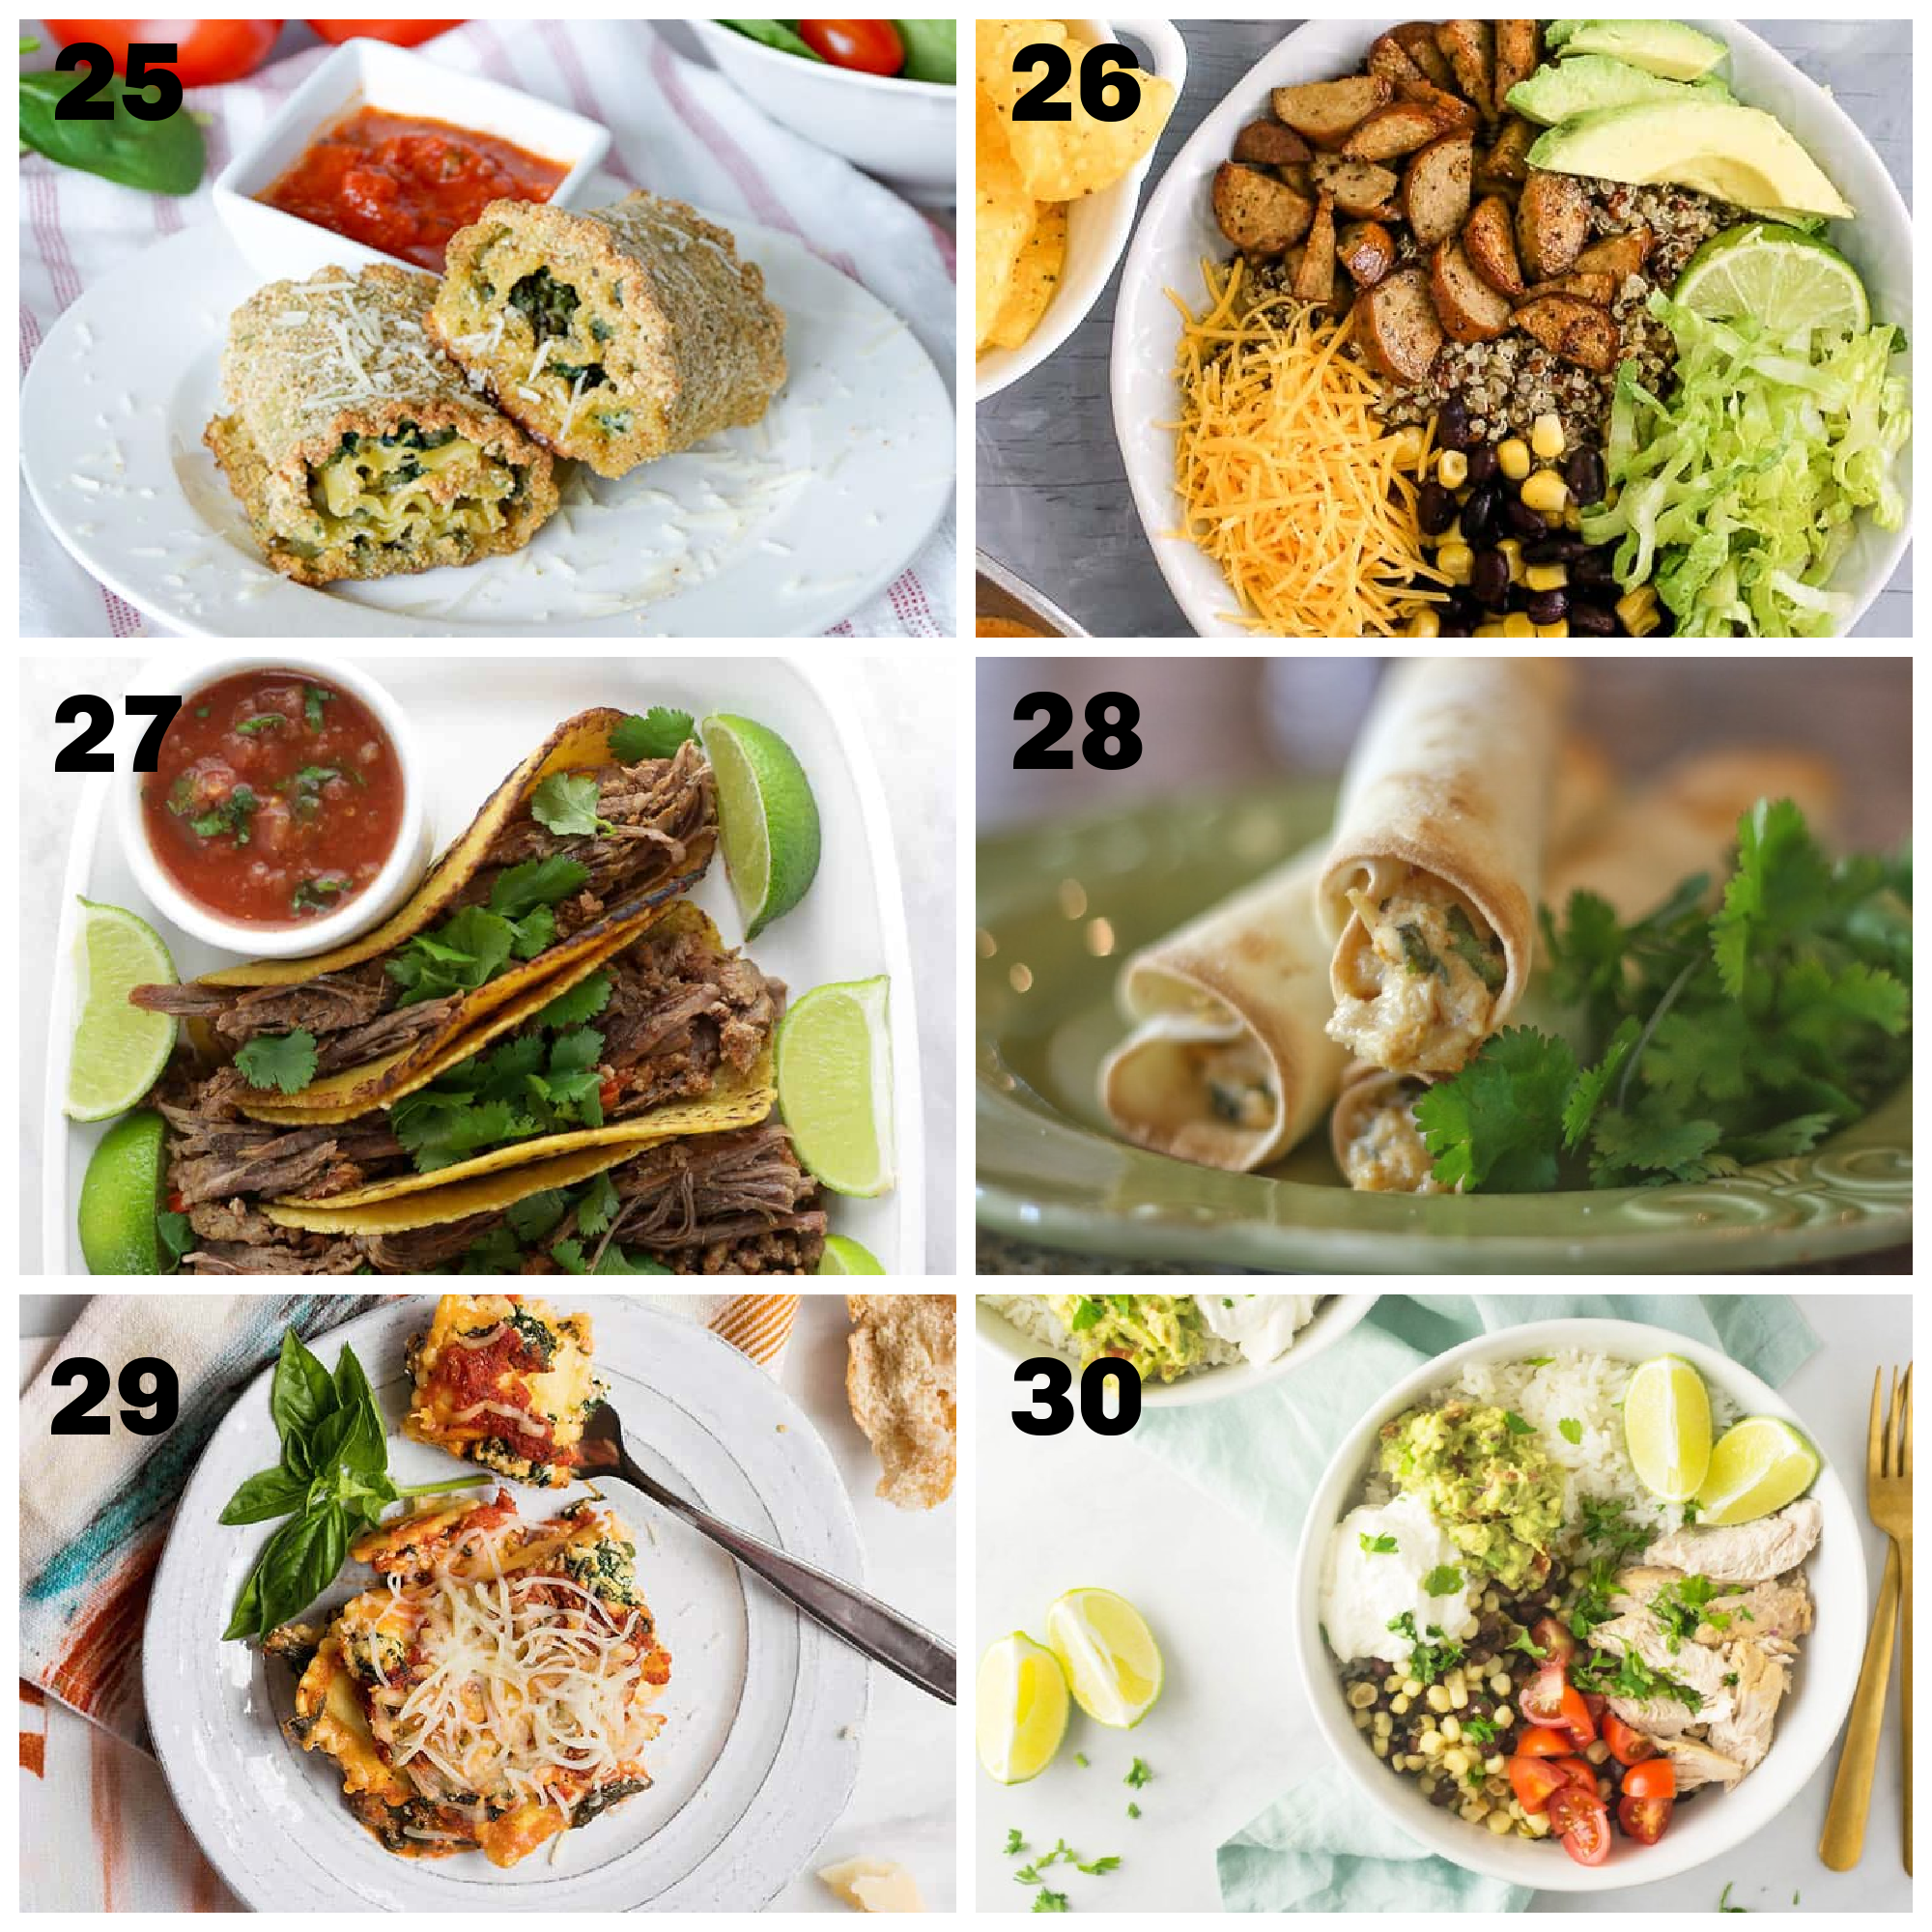 6 dinner ideas for meals for two that are make ahead and freezer-friendly labeled 25-30.